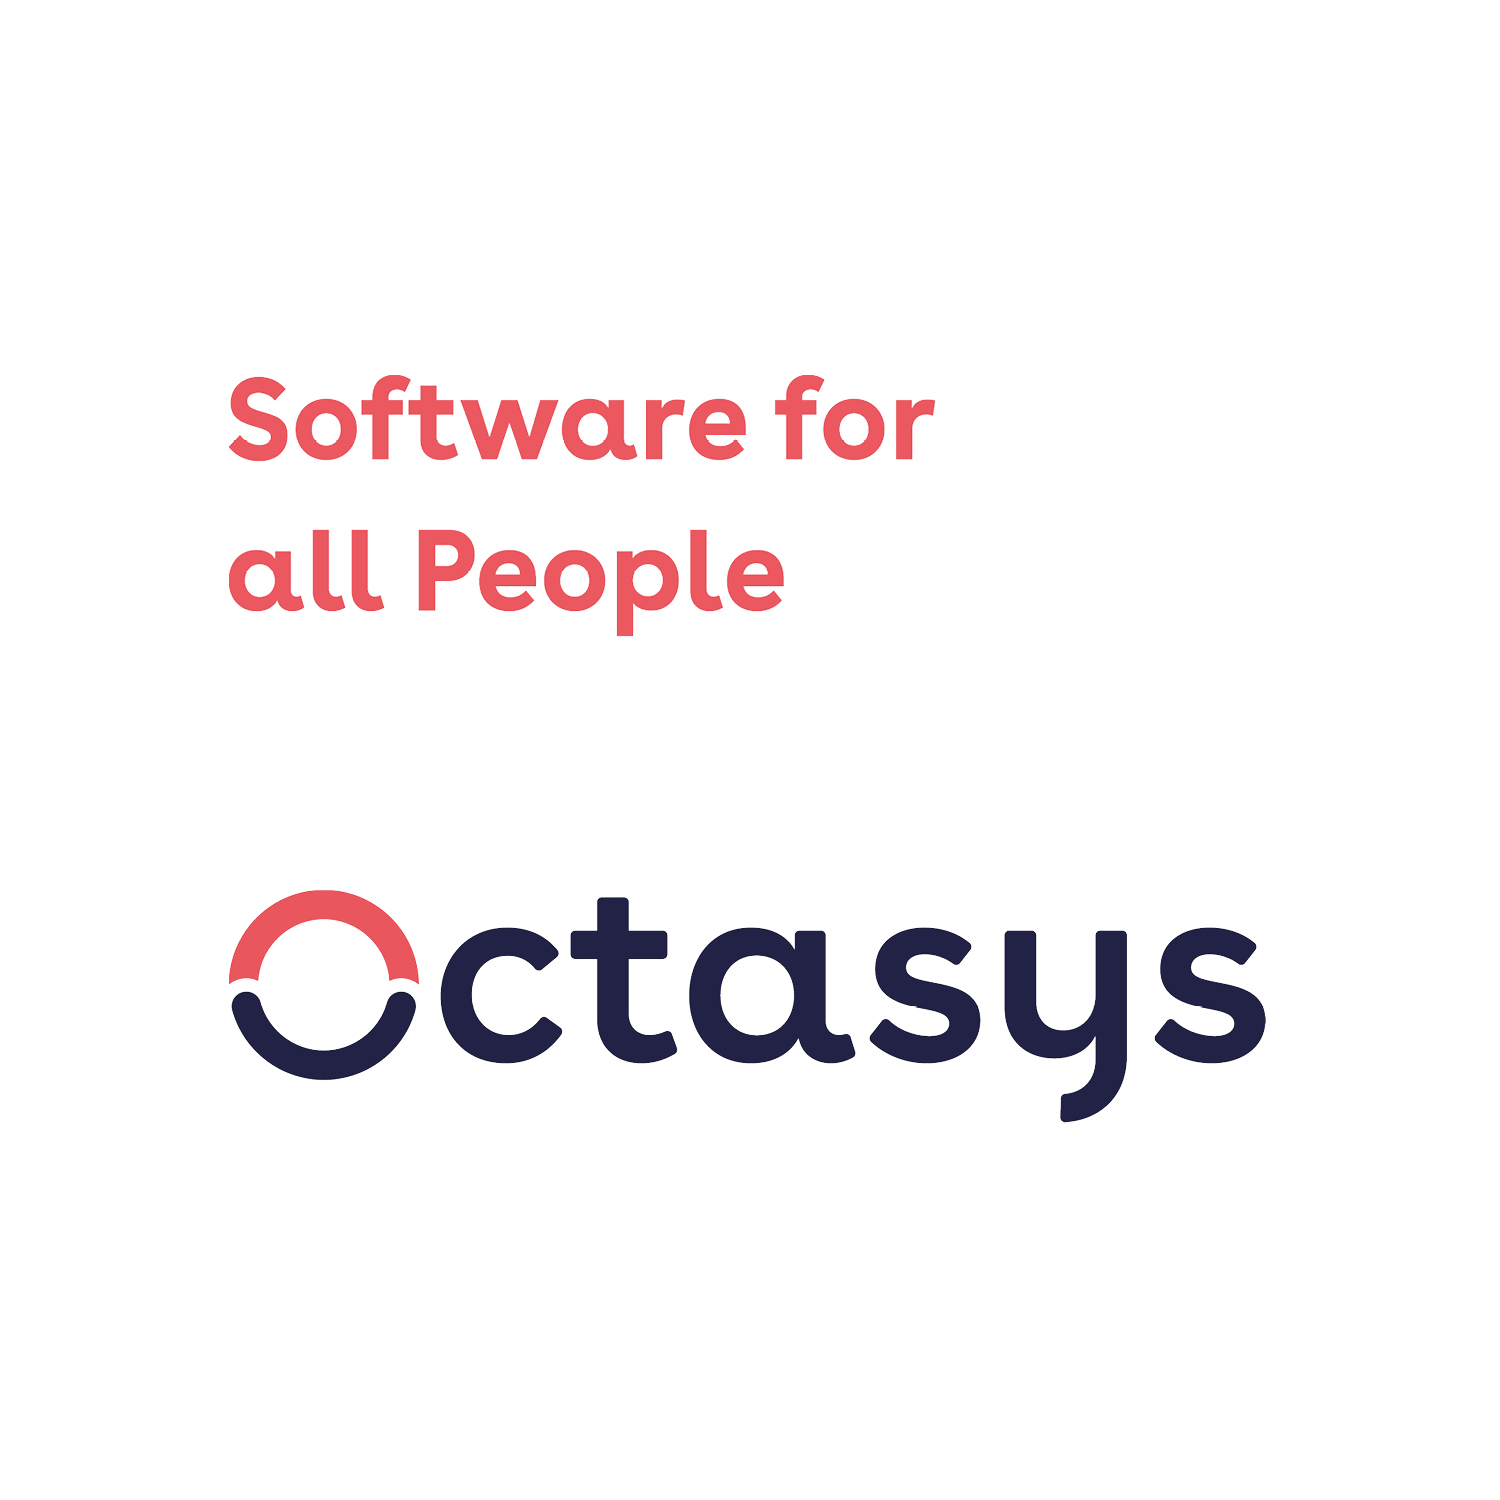 octasys-Logo und Slogan (Software for all People)